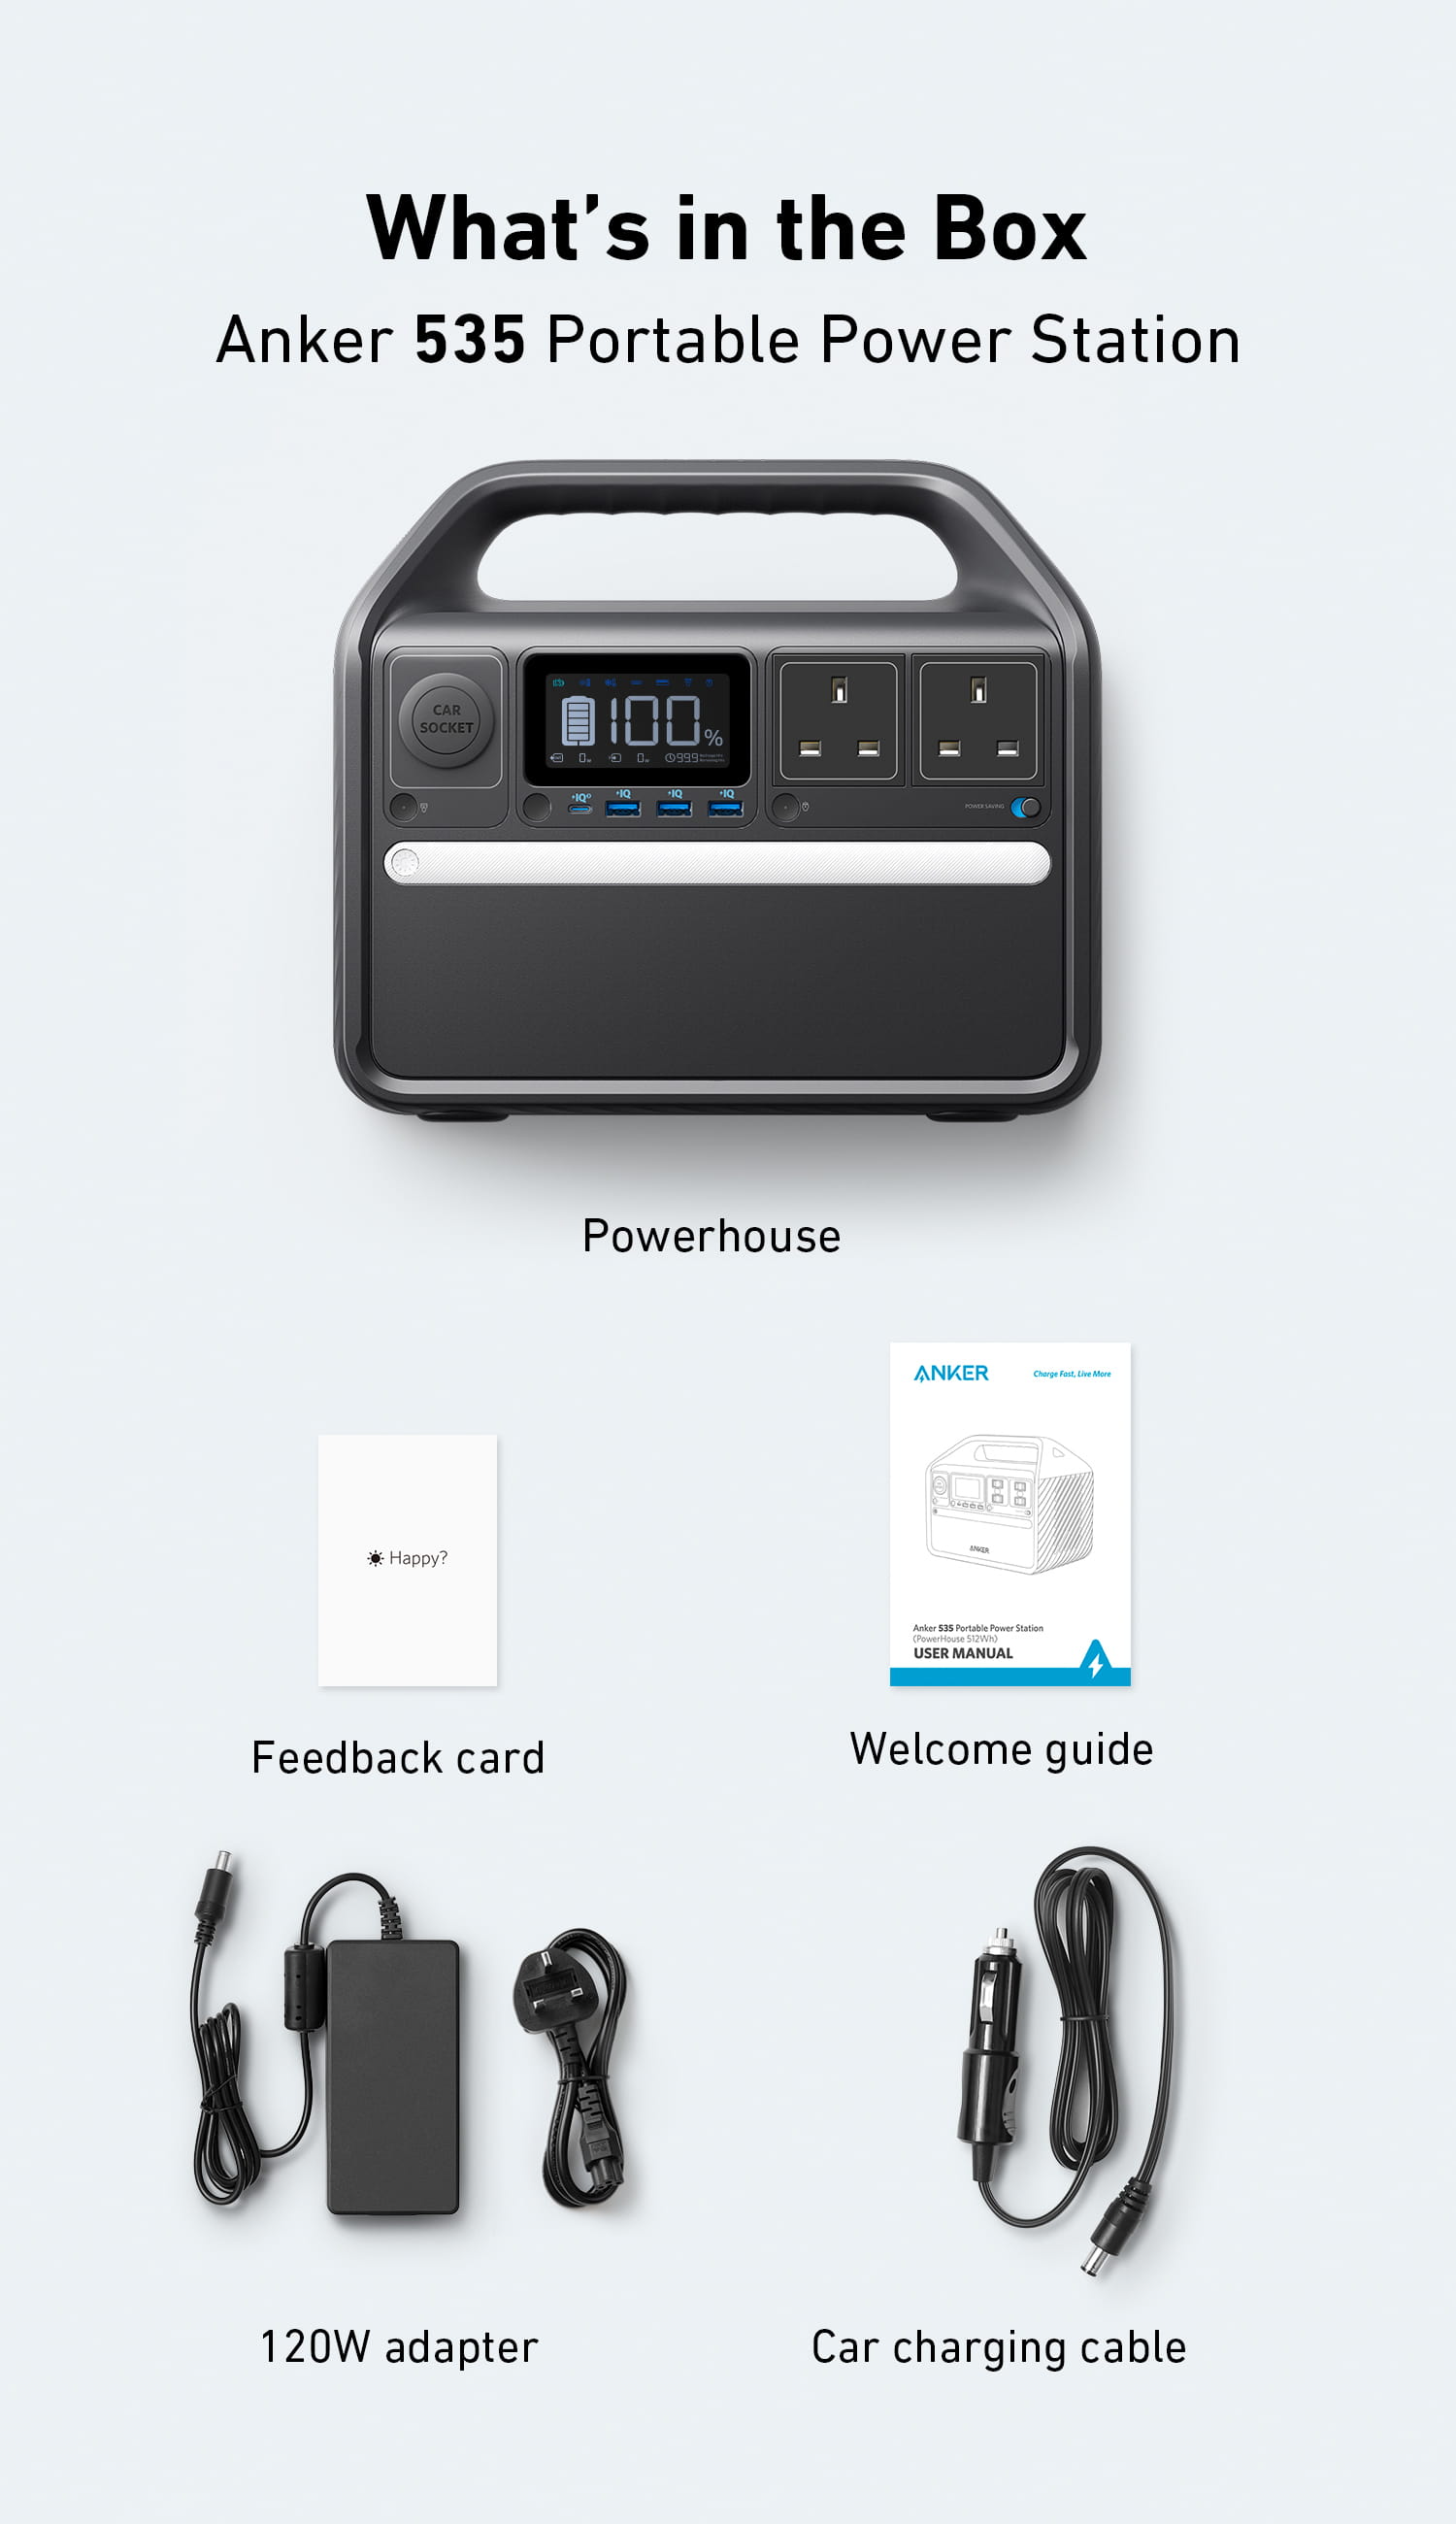 Anker 535 Portable Power Station with LiFePO4 Battery Pack